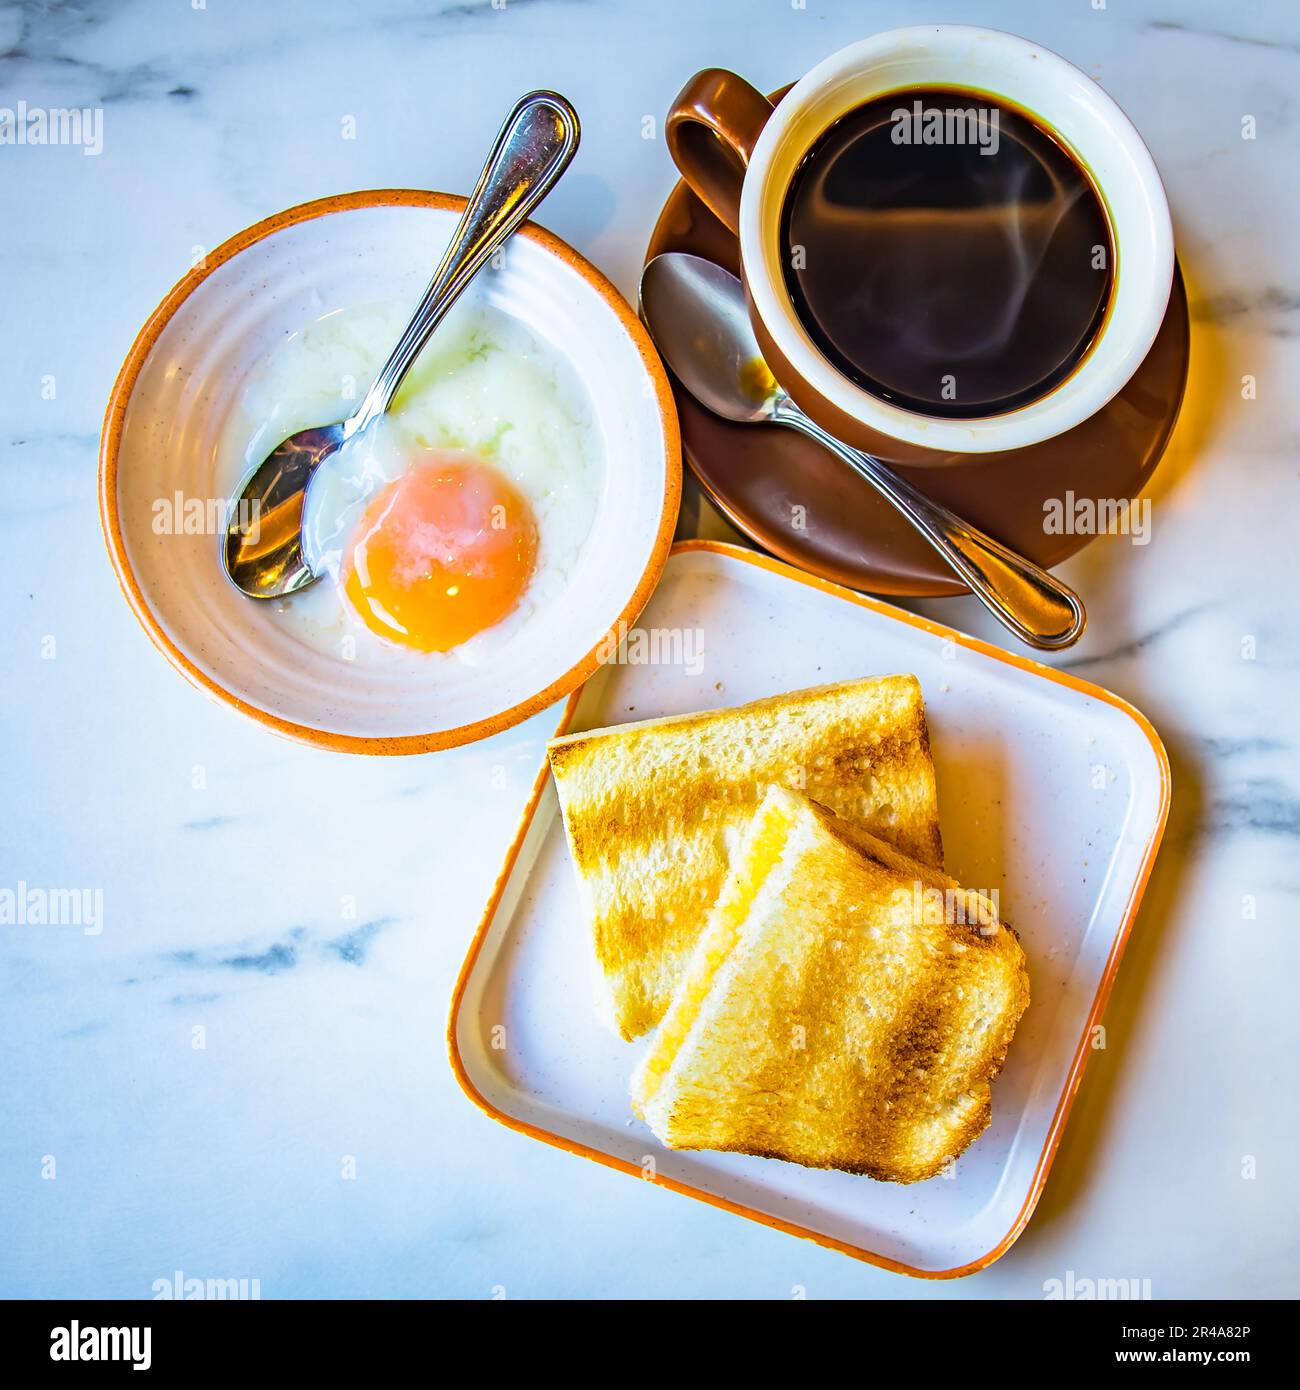 Traditional coffee shop breakfast meals. Black Coffee, Half-Boiled Eggs and Toast. Authentic Hainanese way of food. Stock Photo